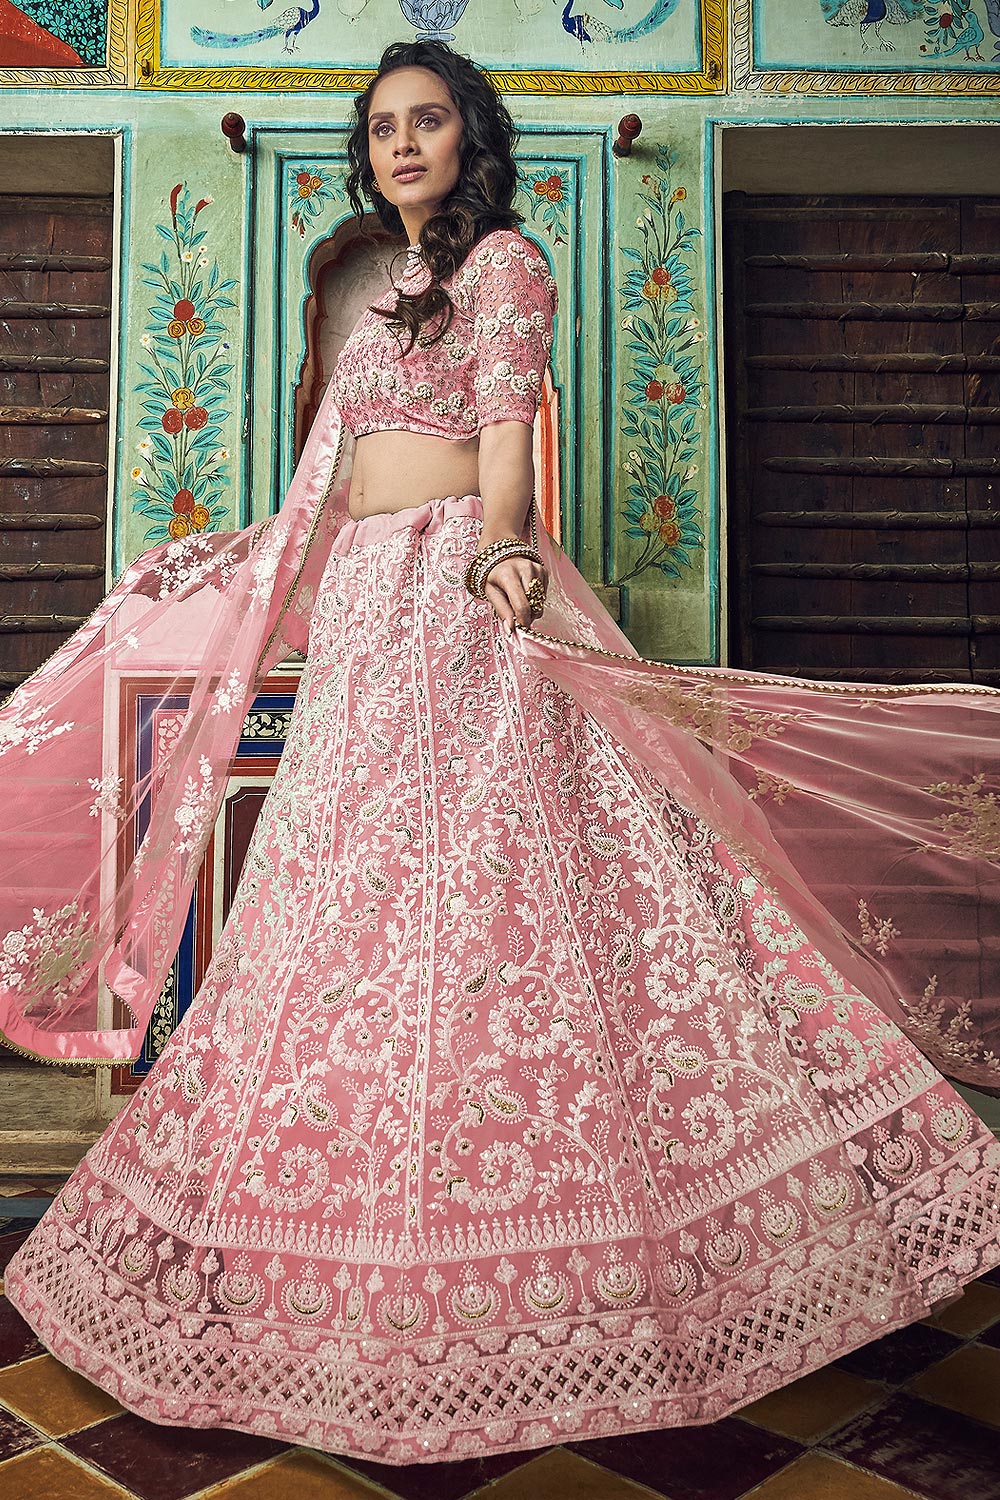 Buy Pastel Pink Net Lehenga Choli With Floral Embroidery Online | Like